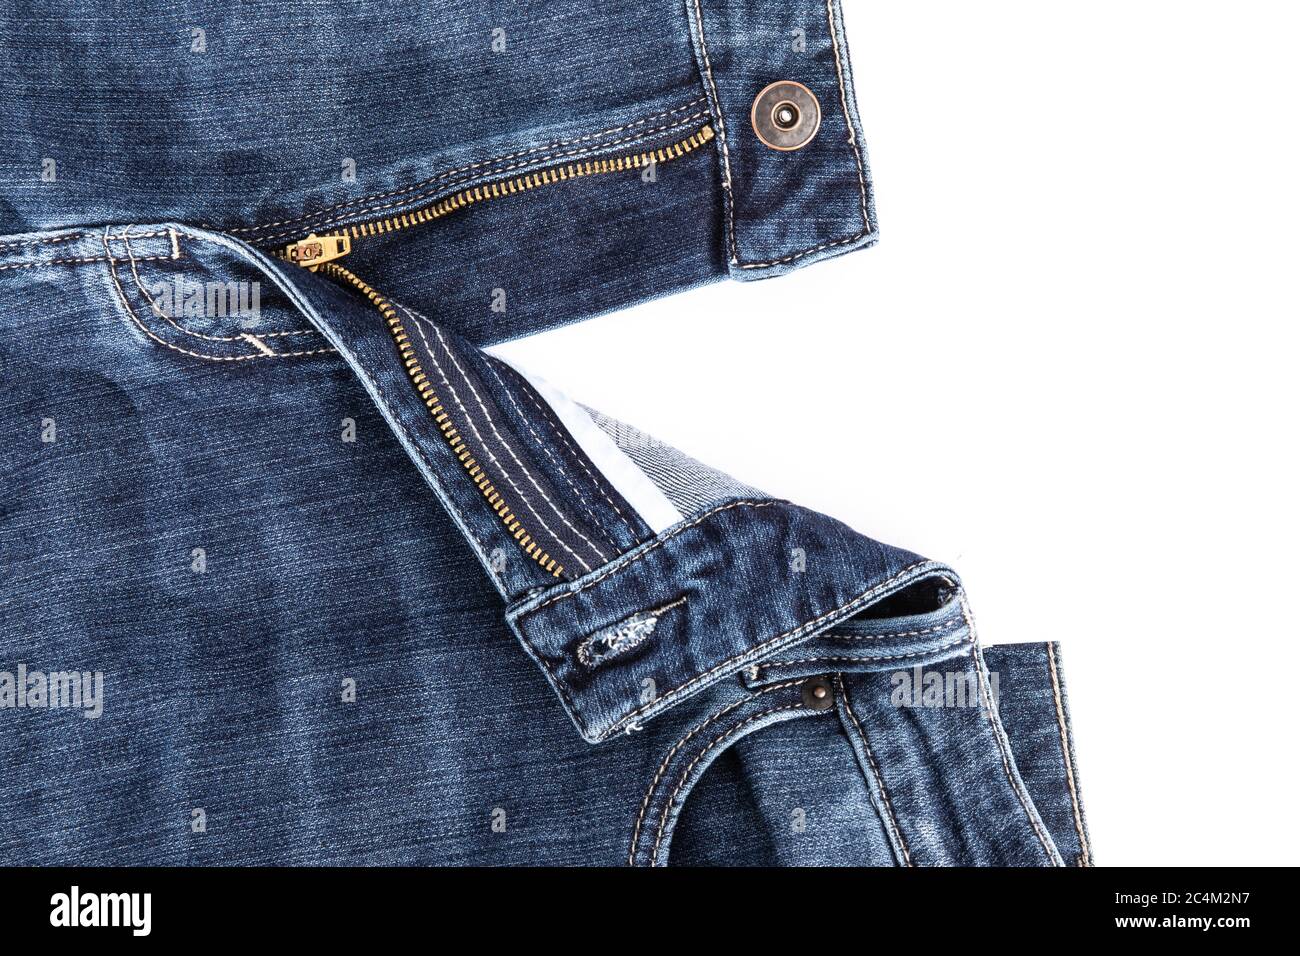 The open zipper of blue denim jeans open on a white background Stock Photo